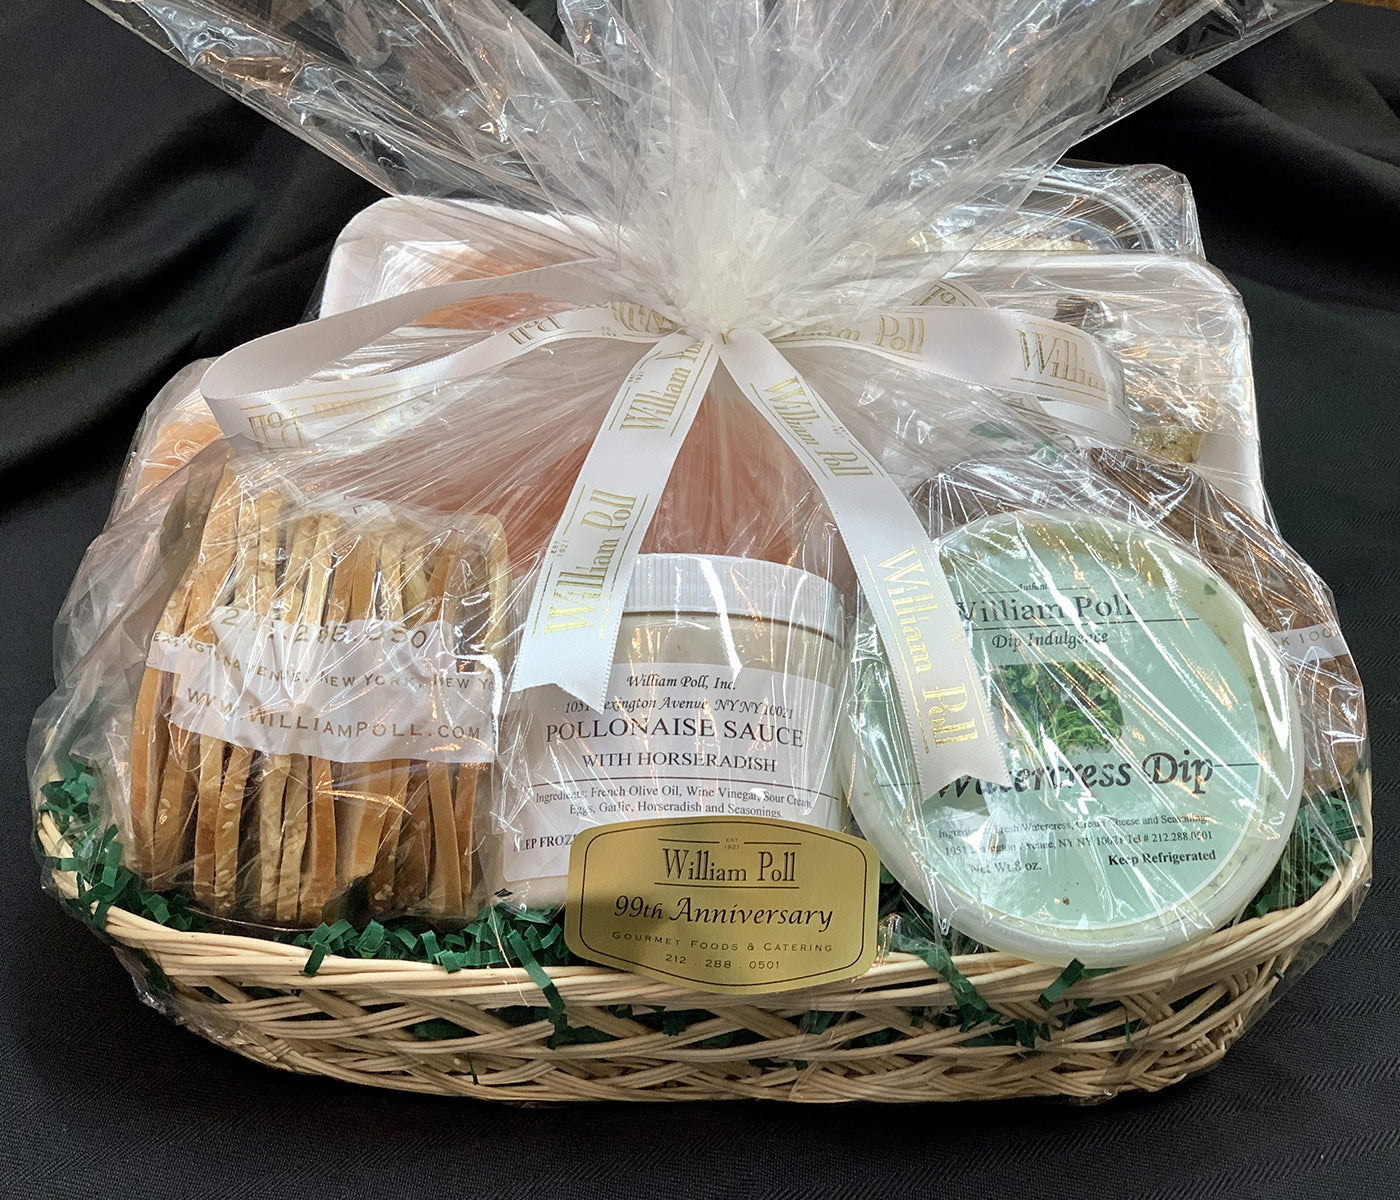 Hand-Sliced Smoked Fish and Watercress Dip Gift Basket - William Poll, Inc.